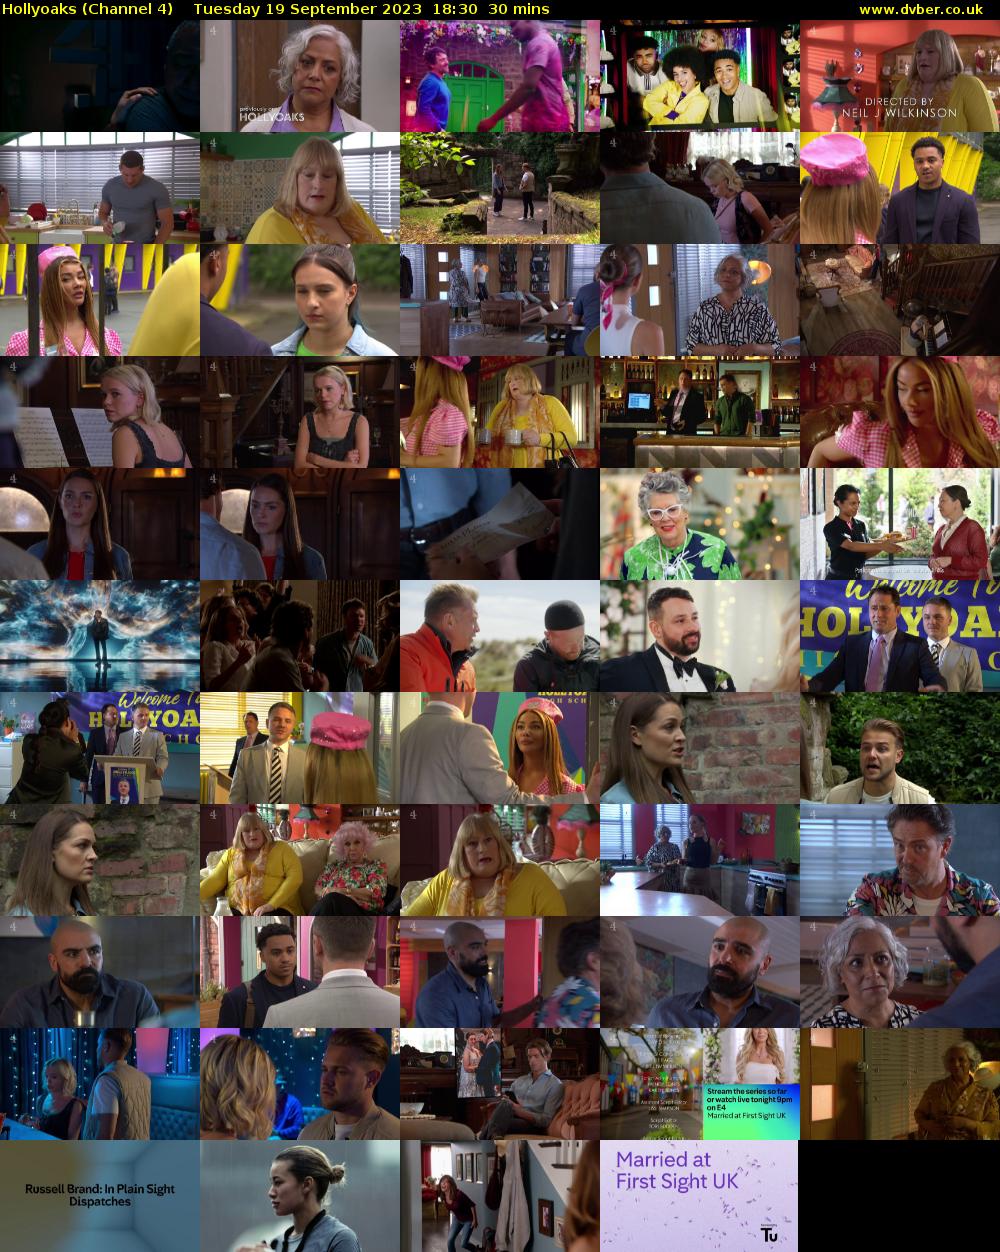 Hollyoaks (Channel 4) Tuesday 19 September 2023 18:30 - 19:00